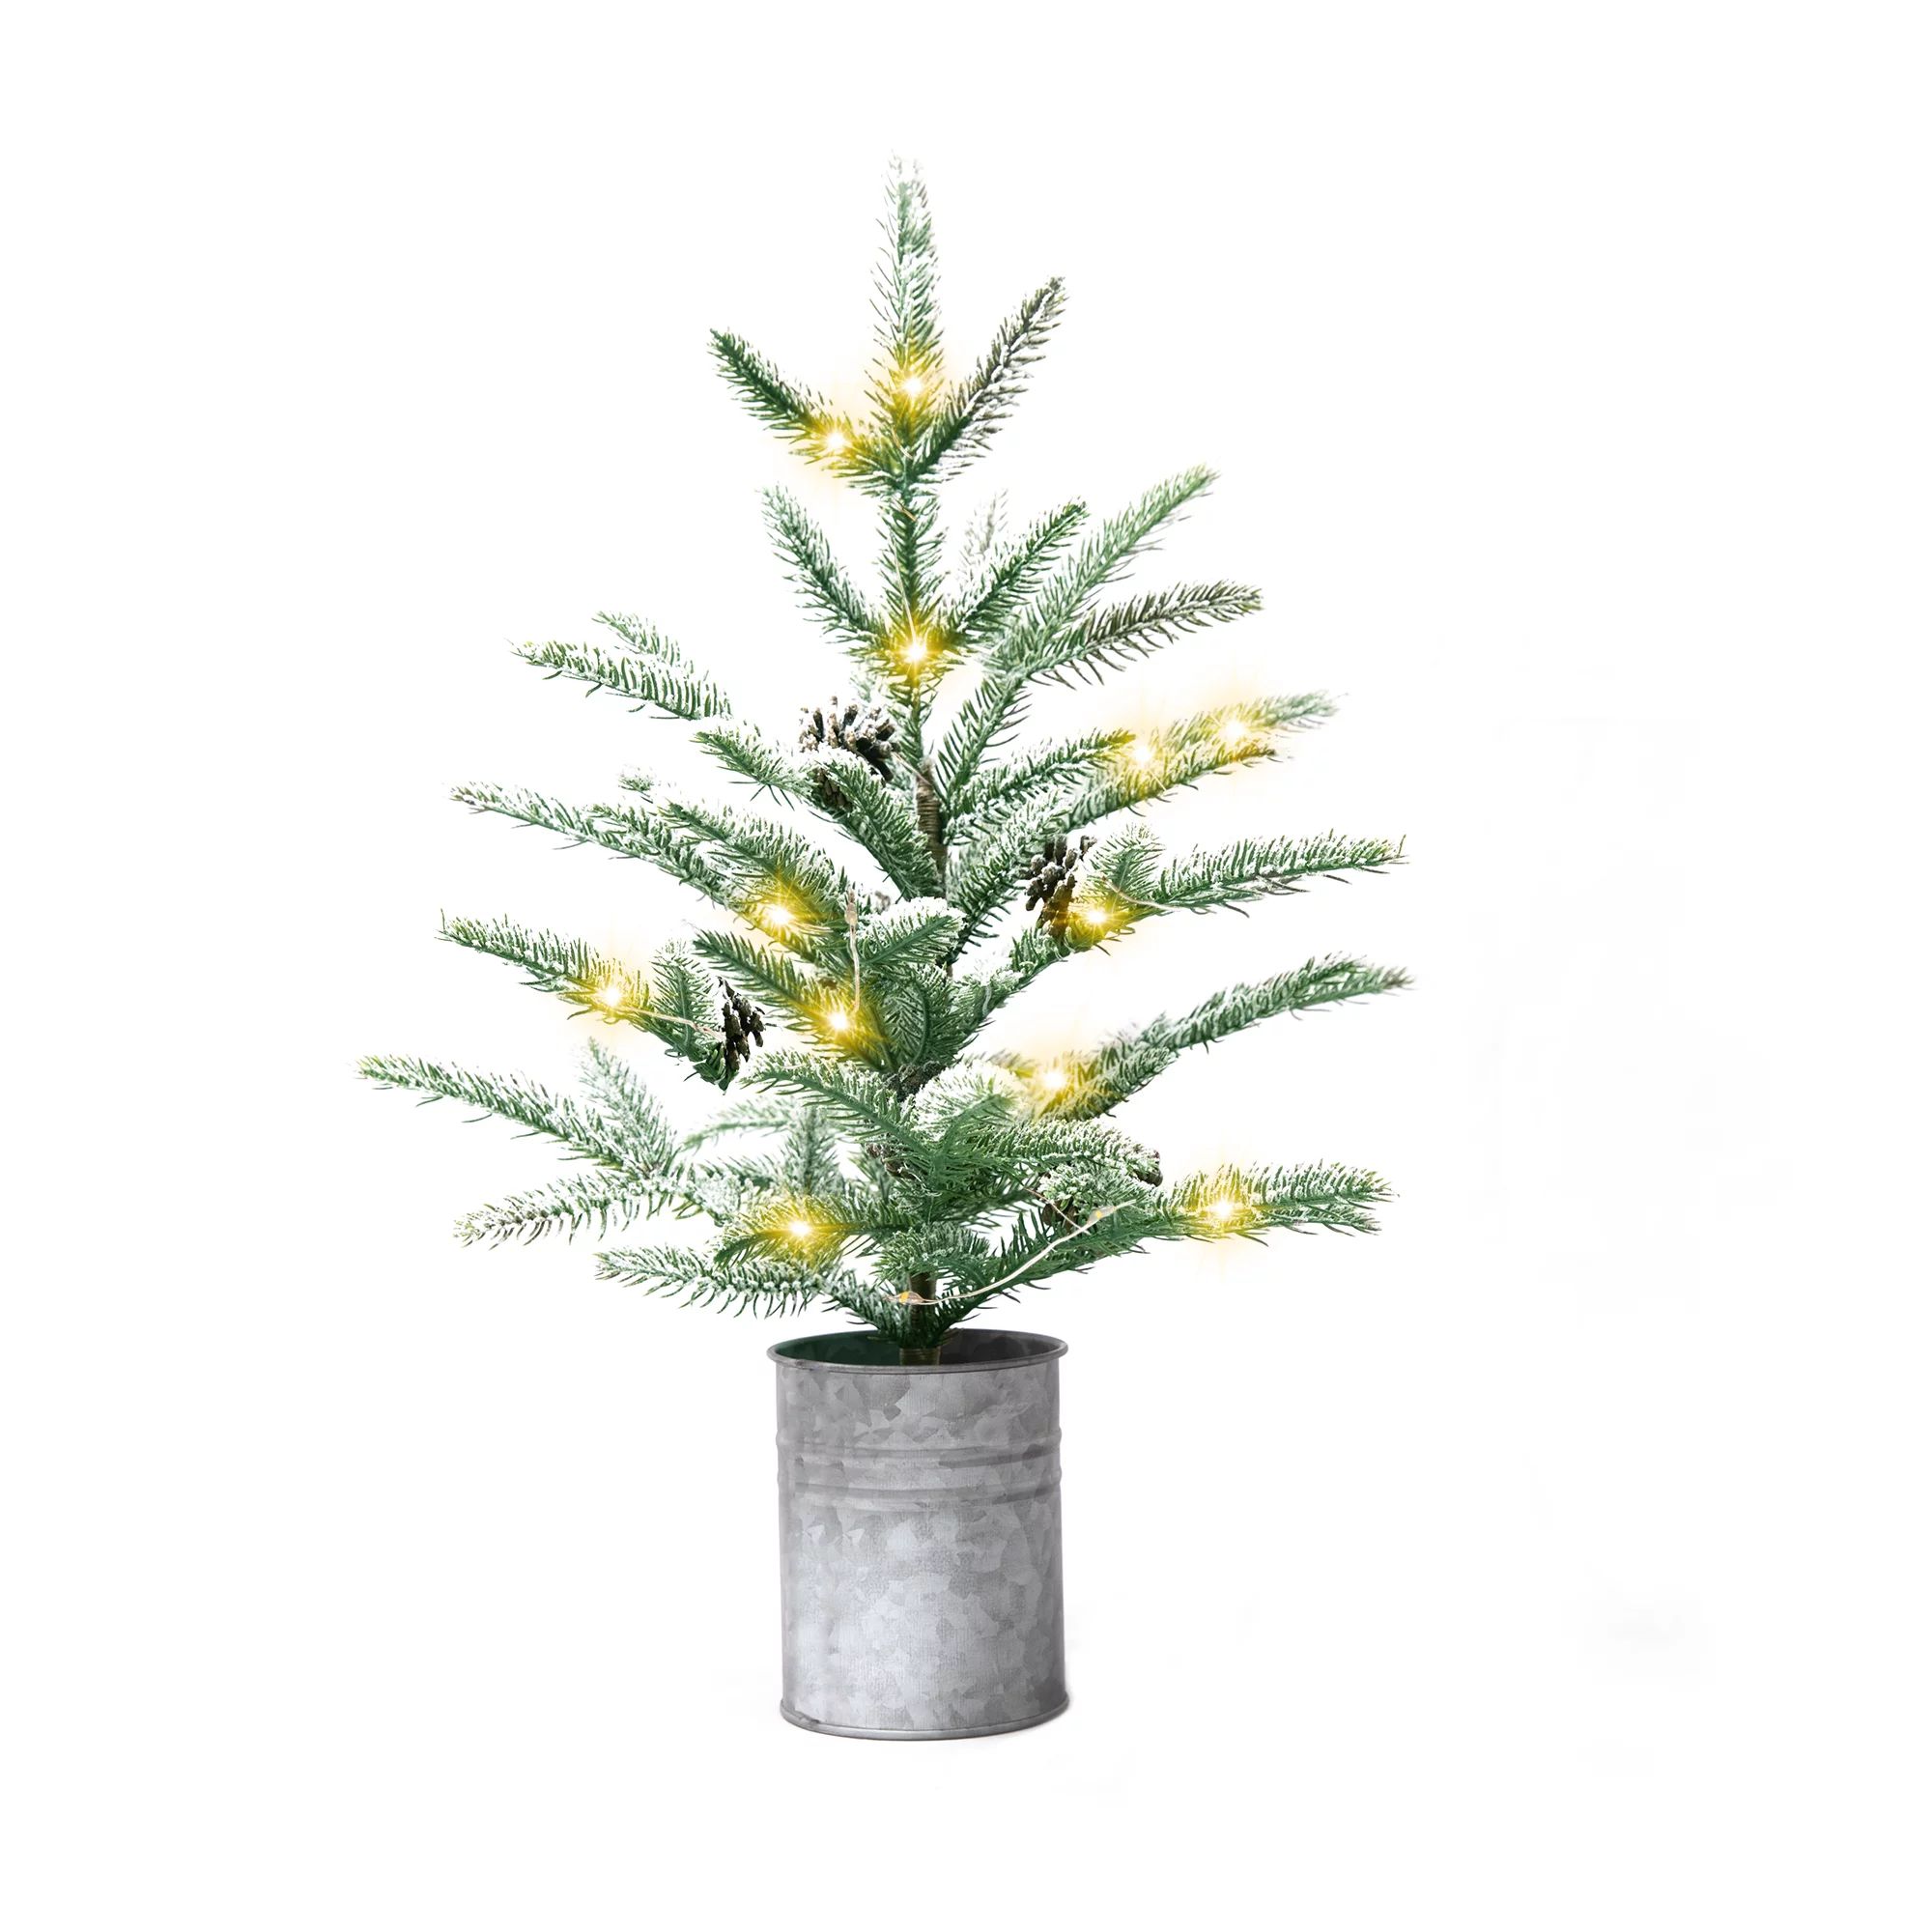 KPCB Small Christmas Tree Tabletop Christmas Decorations Rustic Style 2 ft with LED lights | Walmart (US)